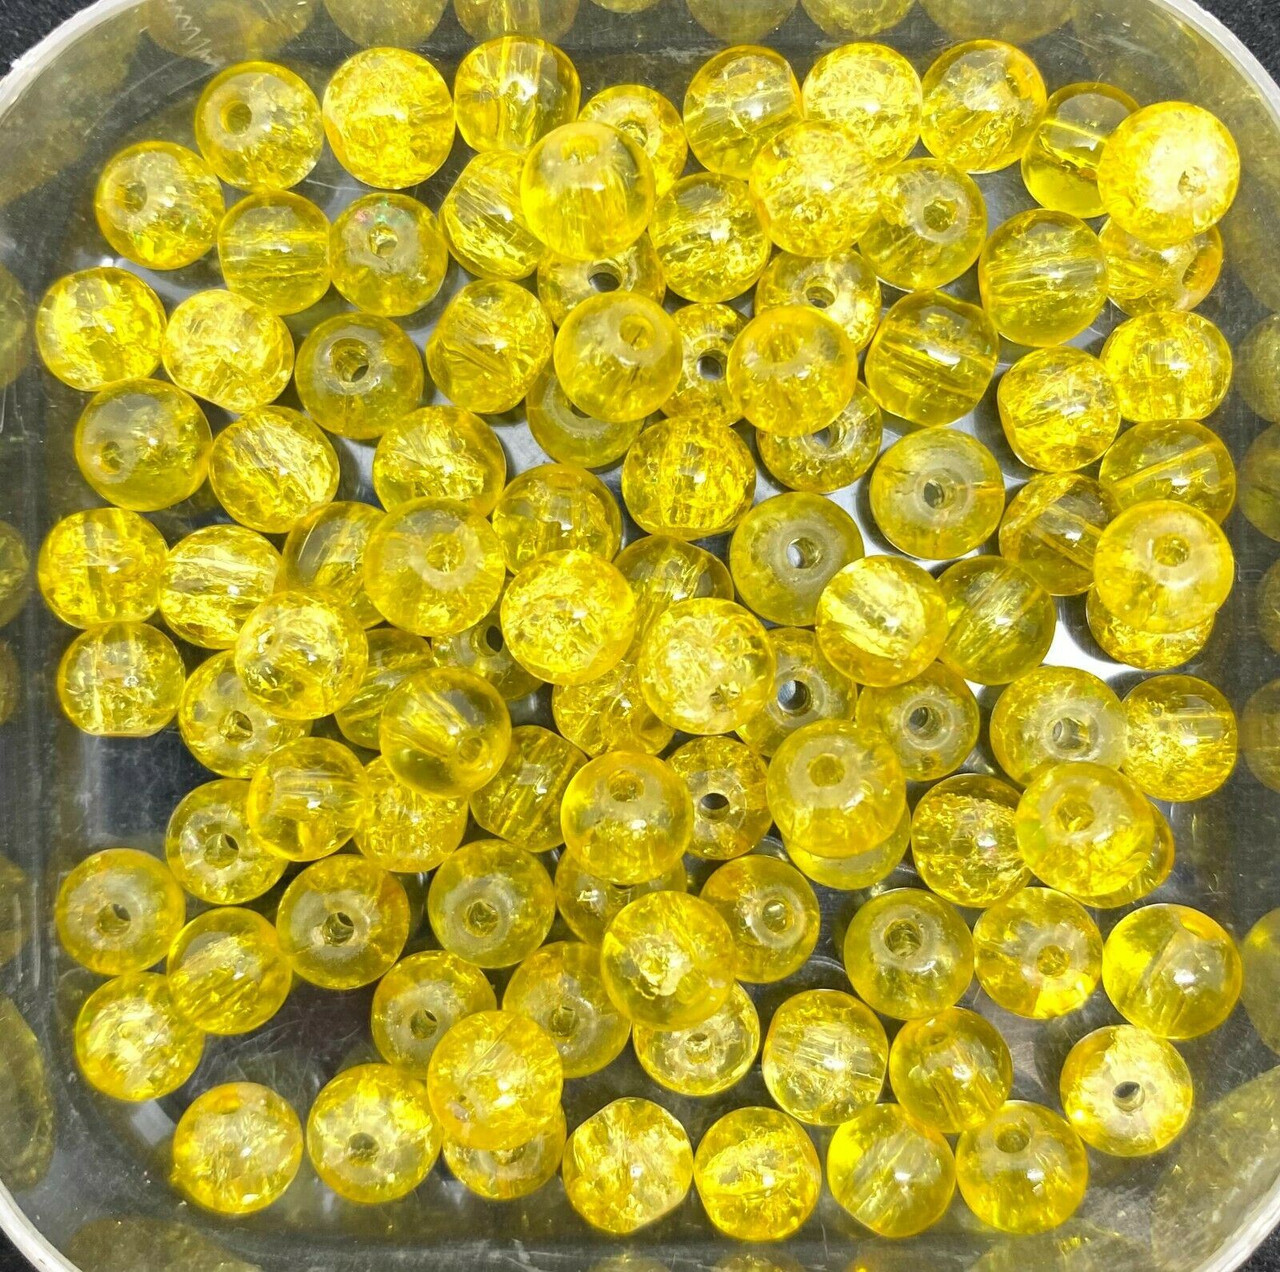 10mm Crackle Glass Beads - Yellow, 40 beads